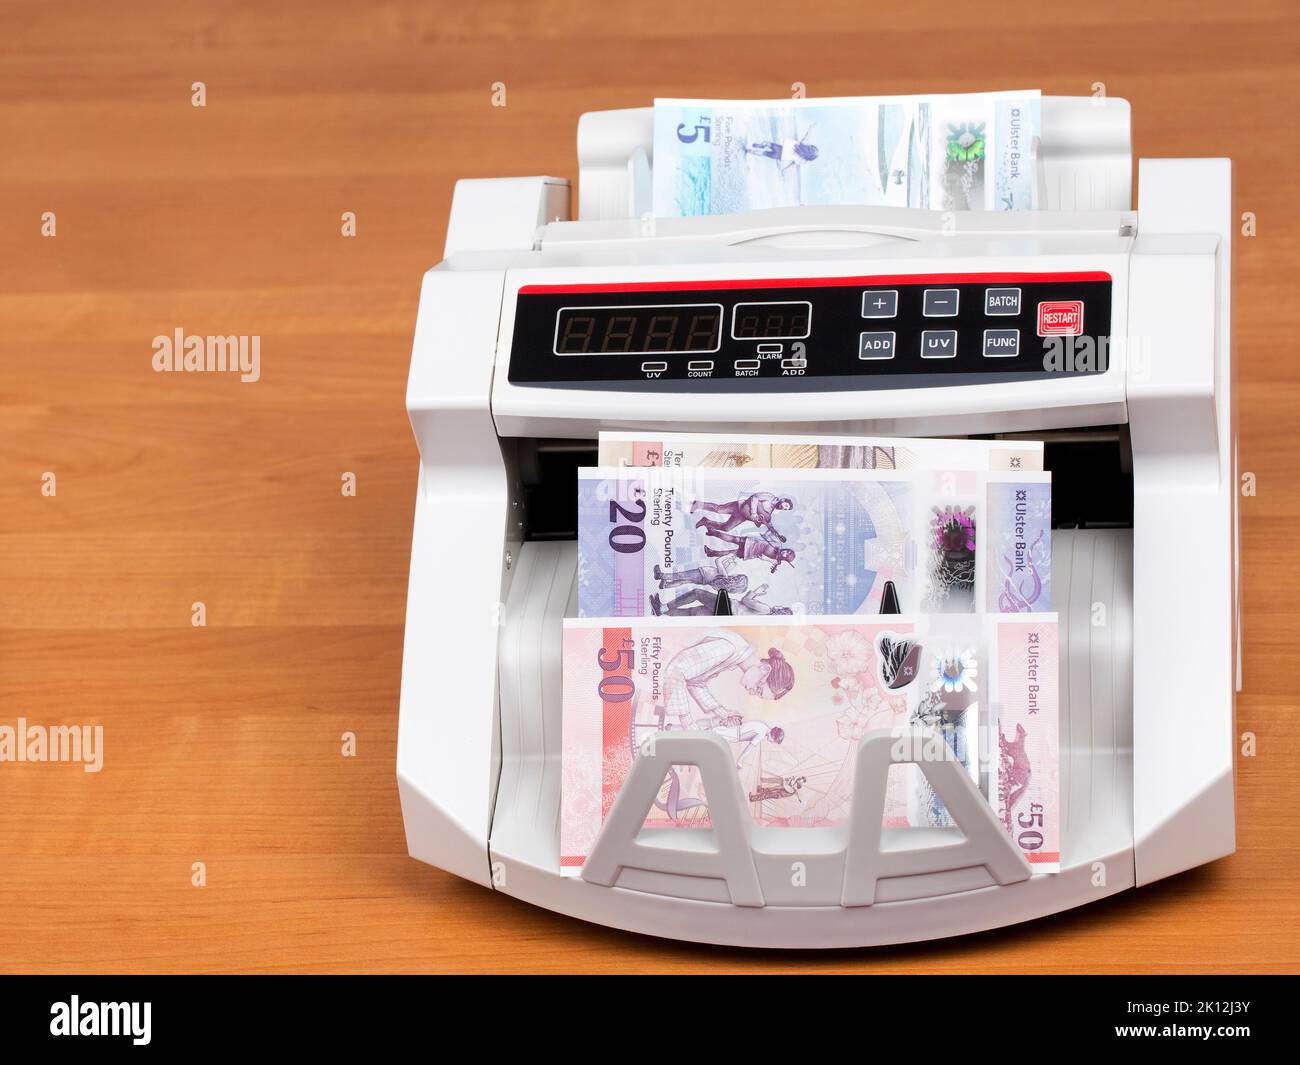 Northern Ireland’s money - Pounds  in a counting machine Stock Photo